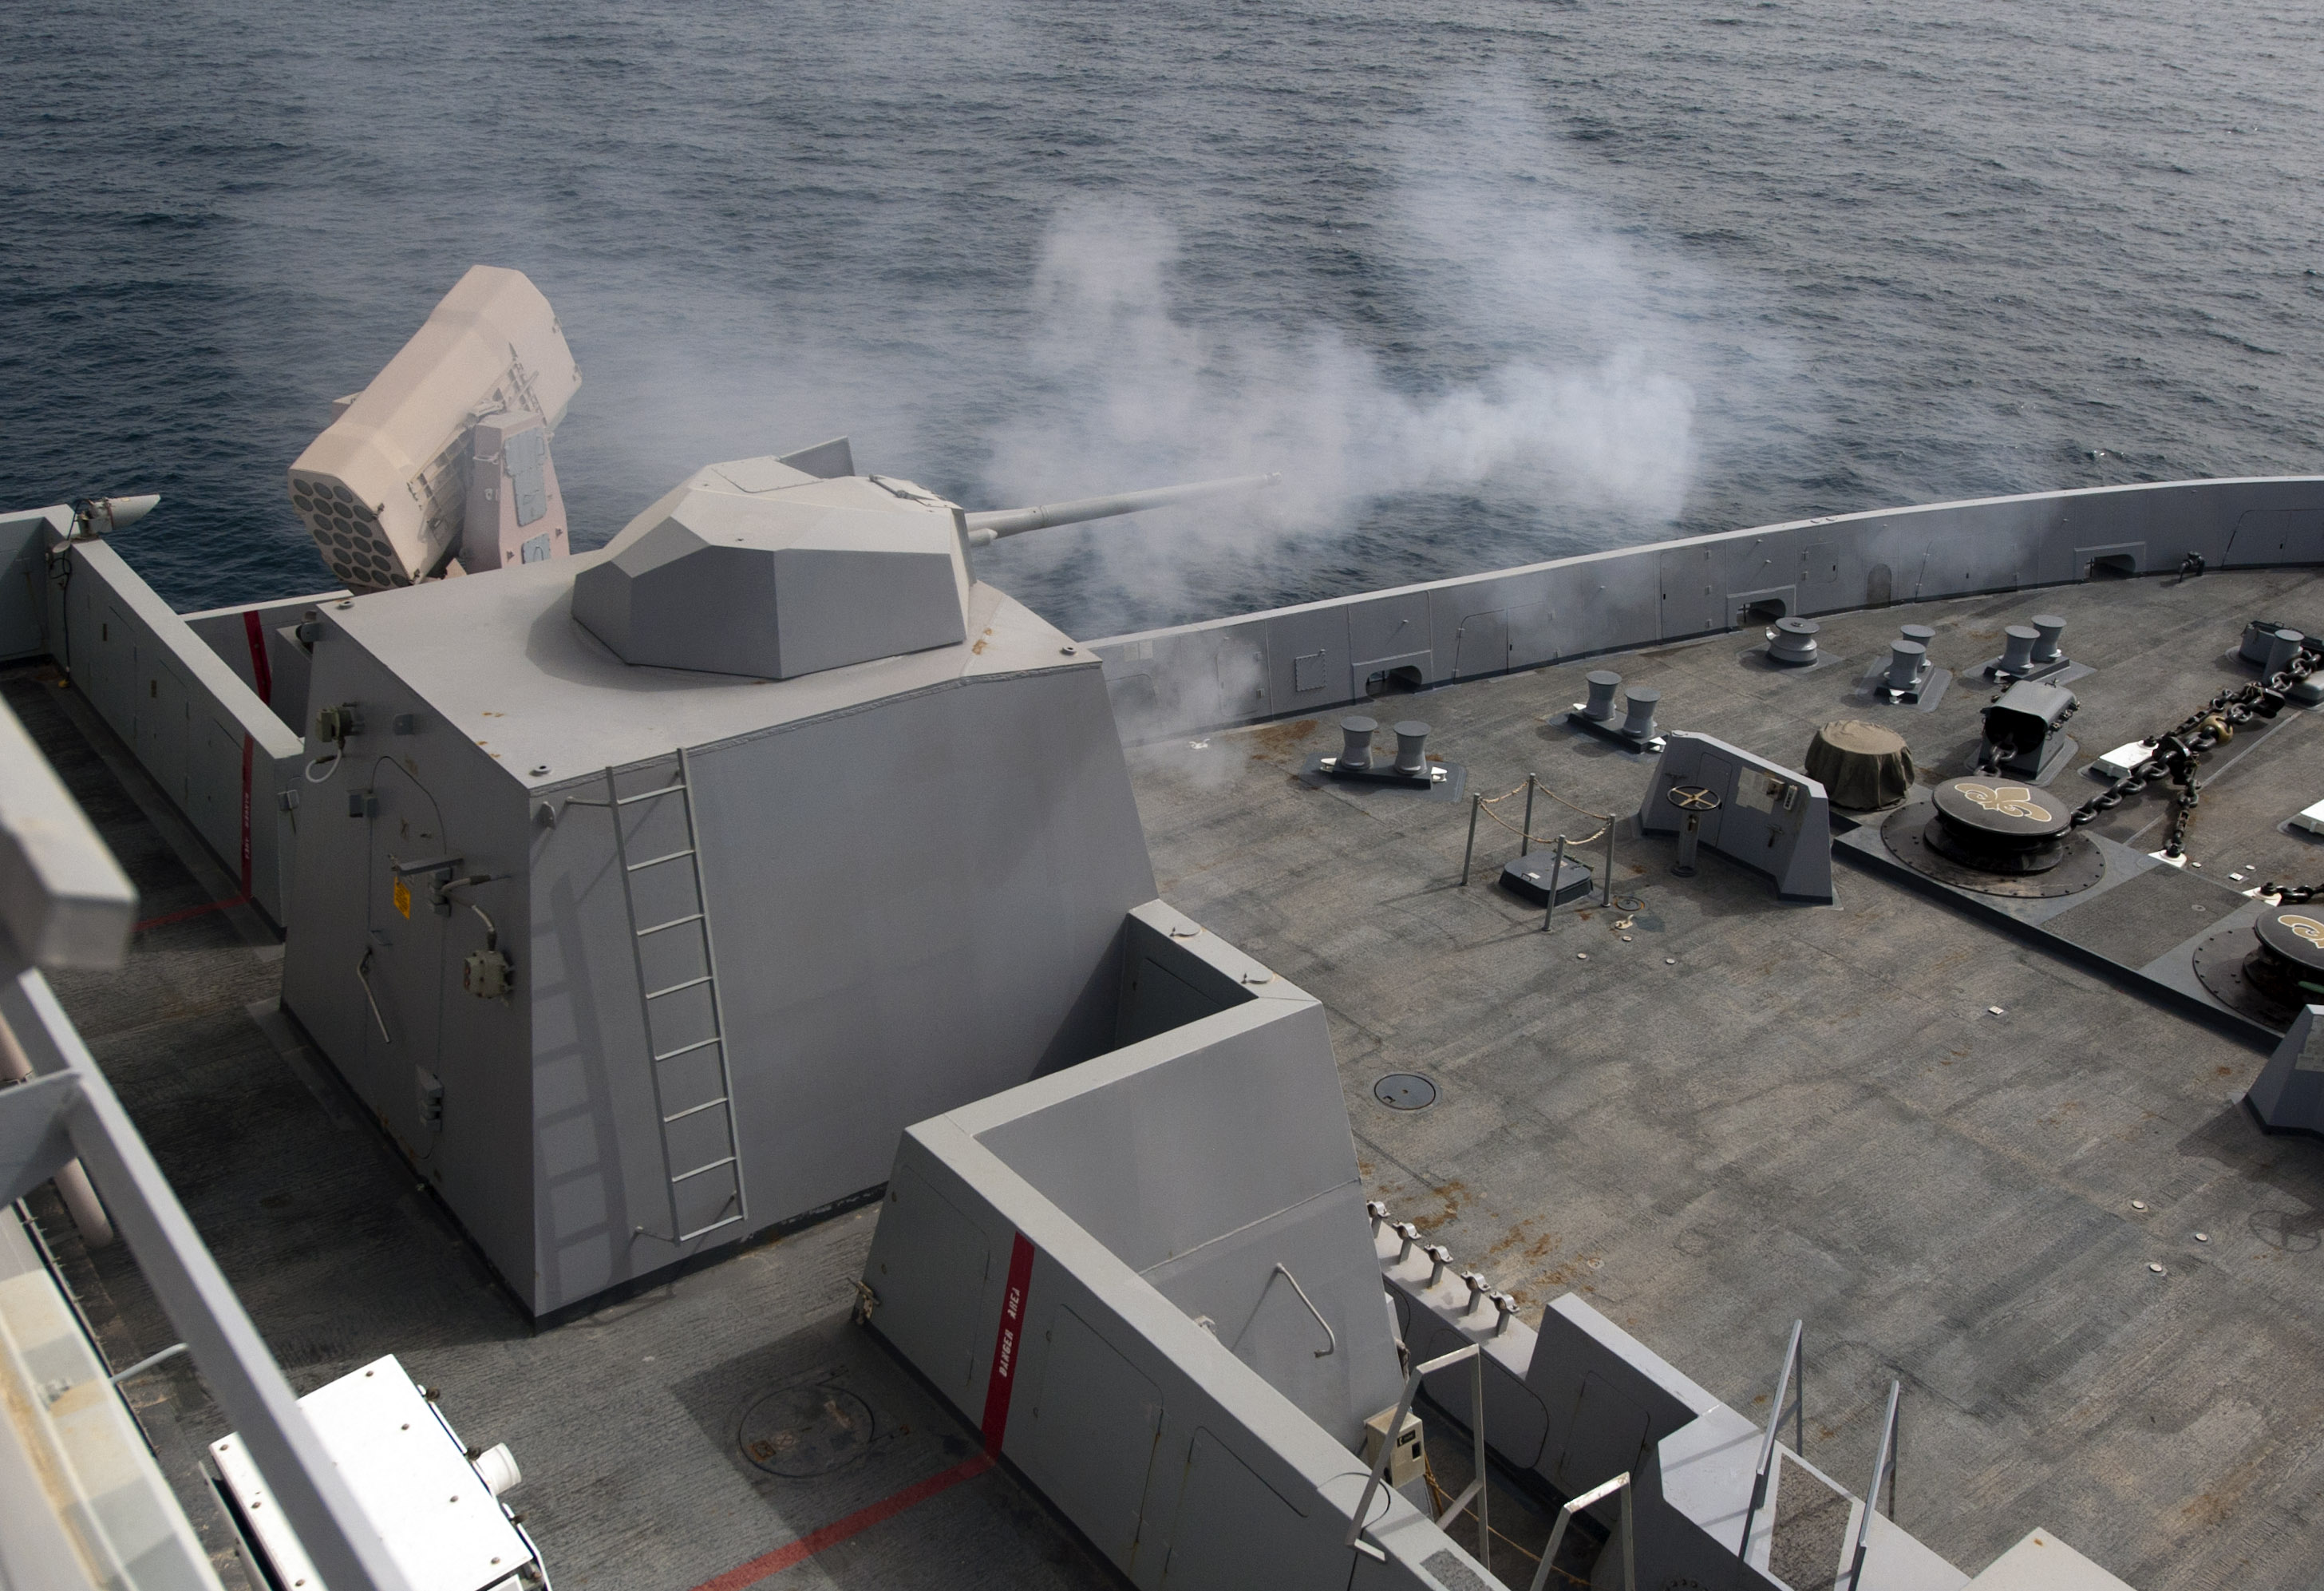 he MK46 Mod 1 weapon system fires a round during a live-fire qualification exercise aboard the amphibious transport dock ship USS New Orleans (LPD-18). US NAvy Photo